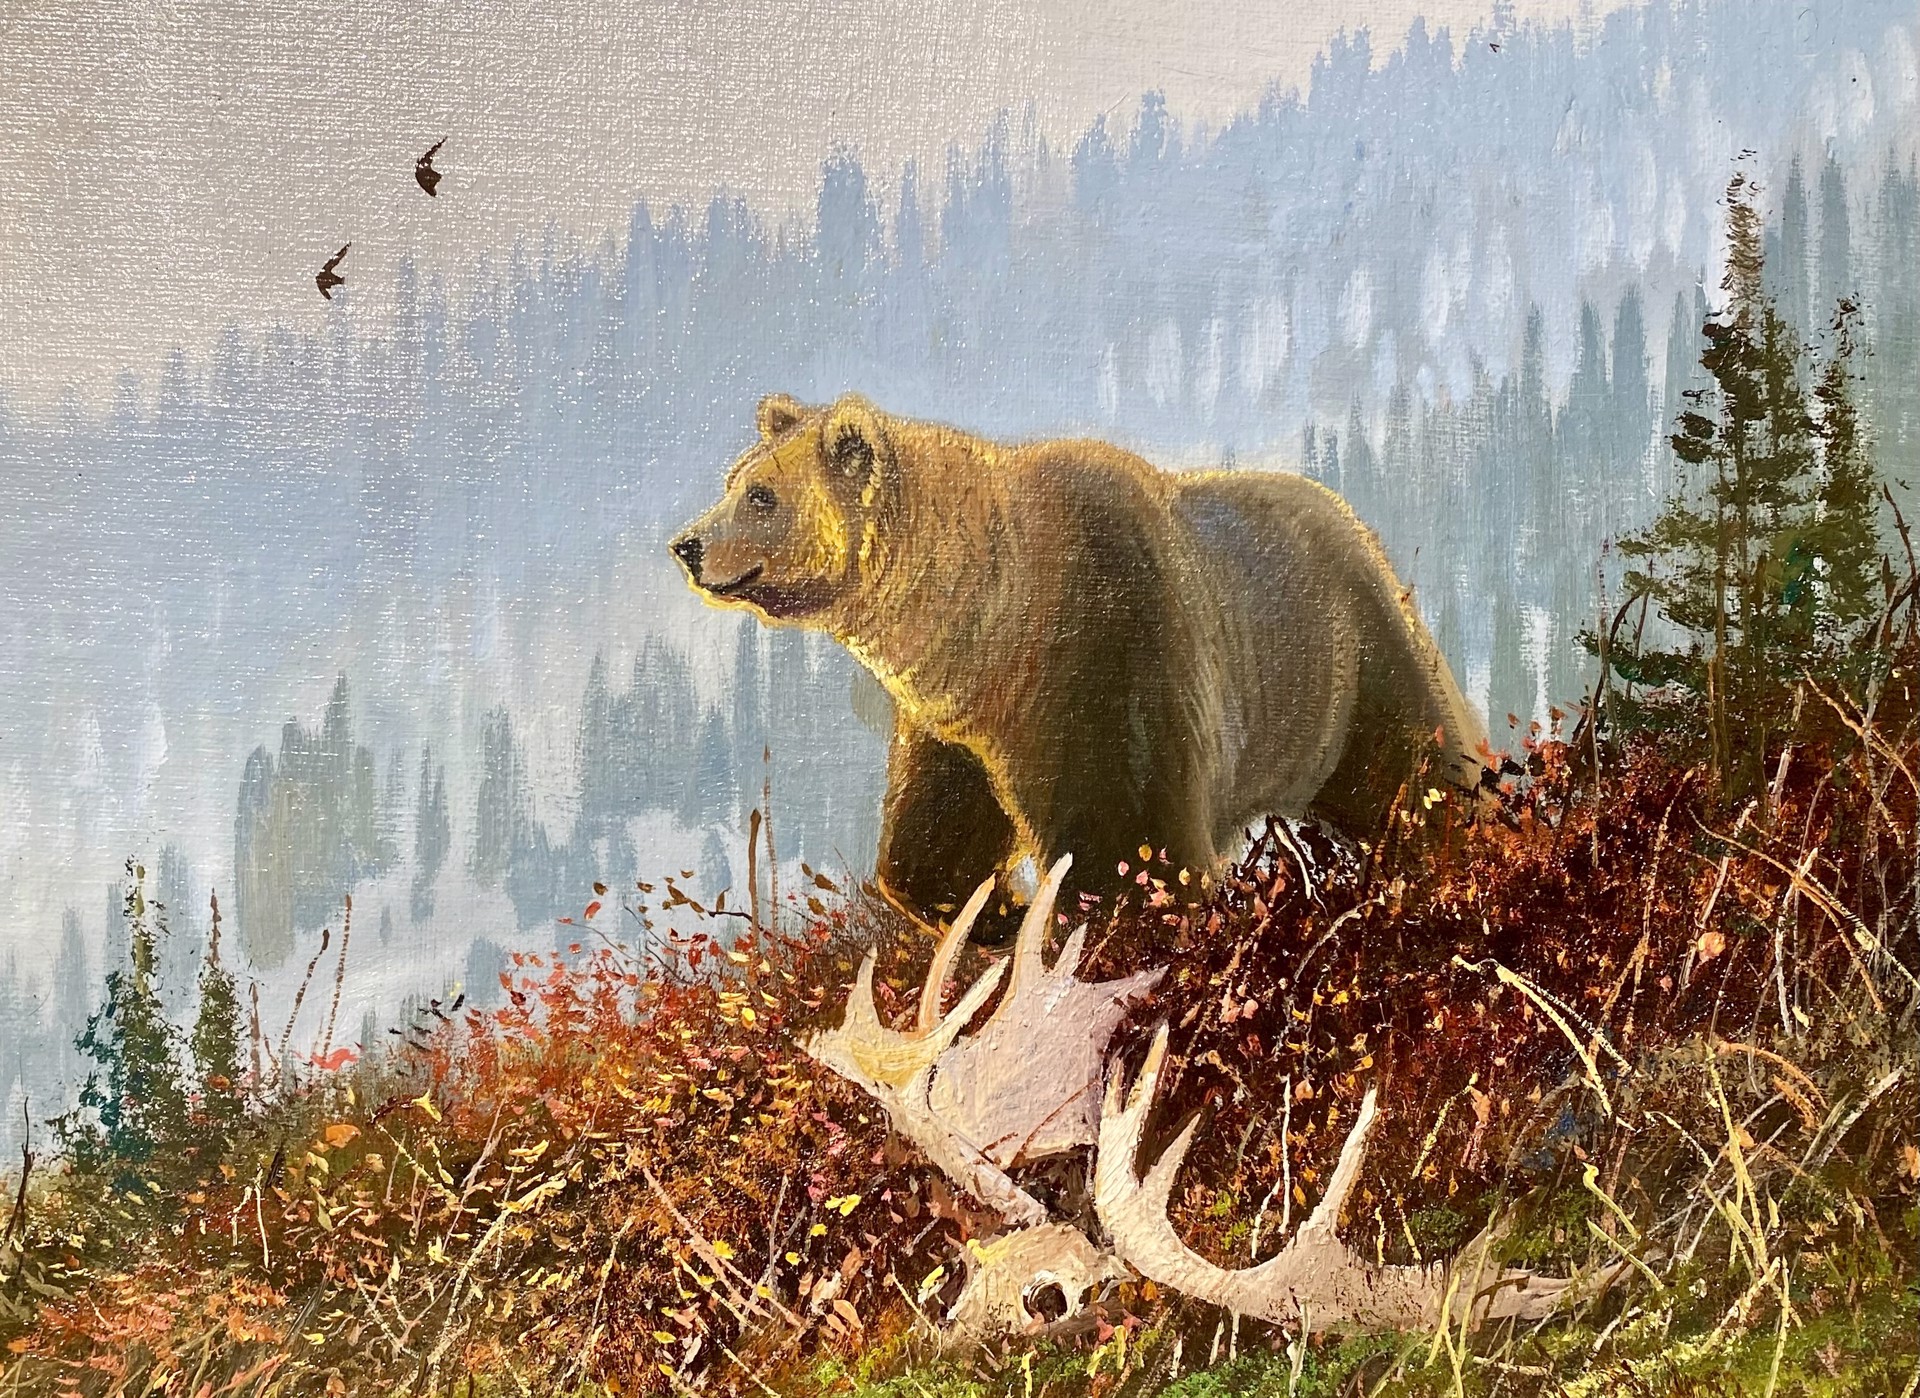 HIGH COUNTRY GRIZZLY by Nicholas Coleman